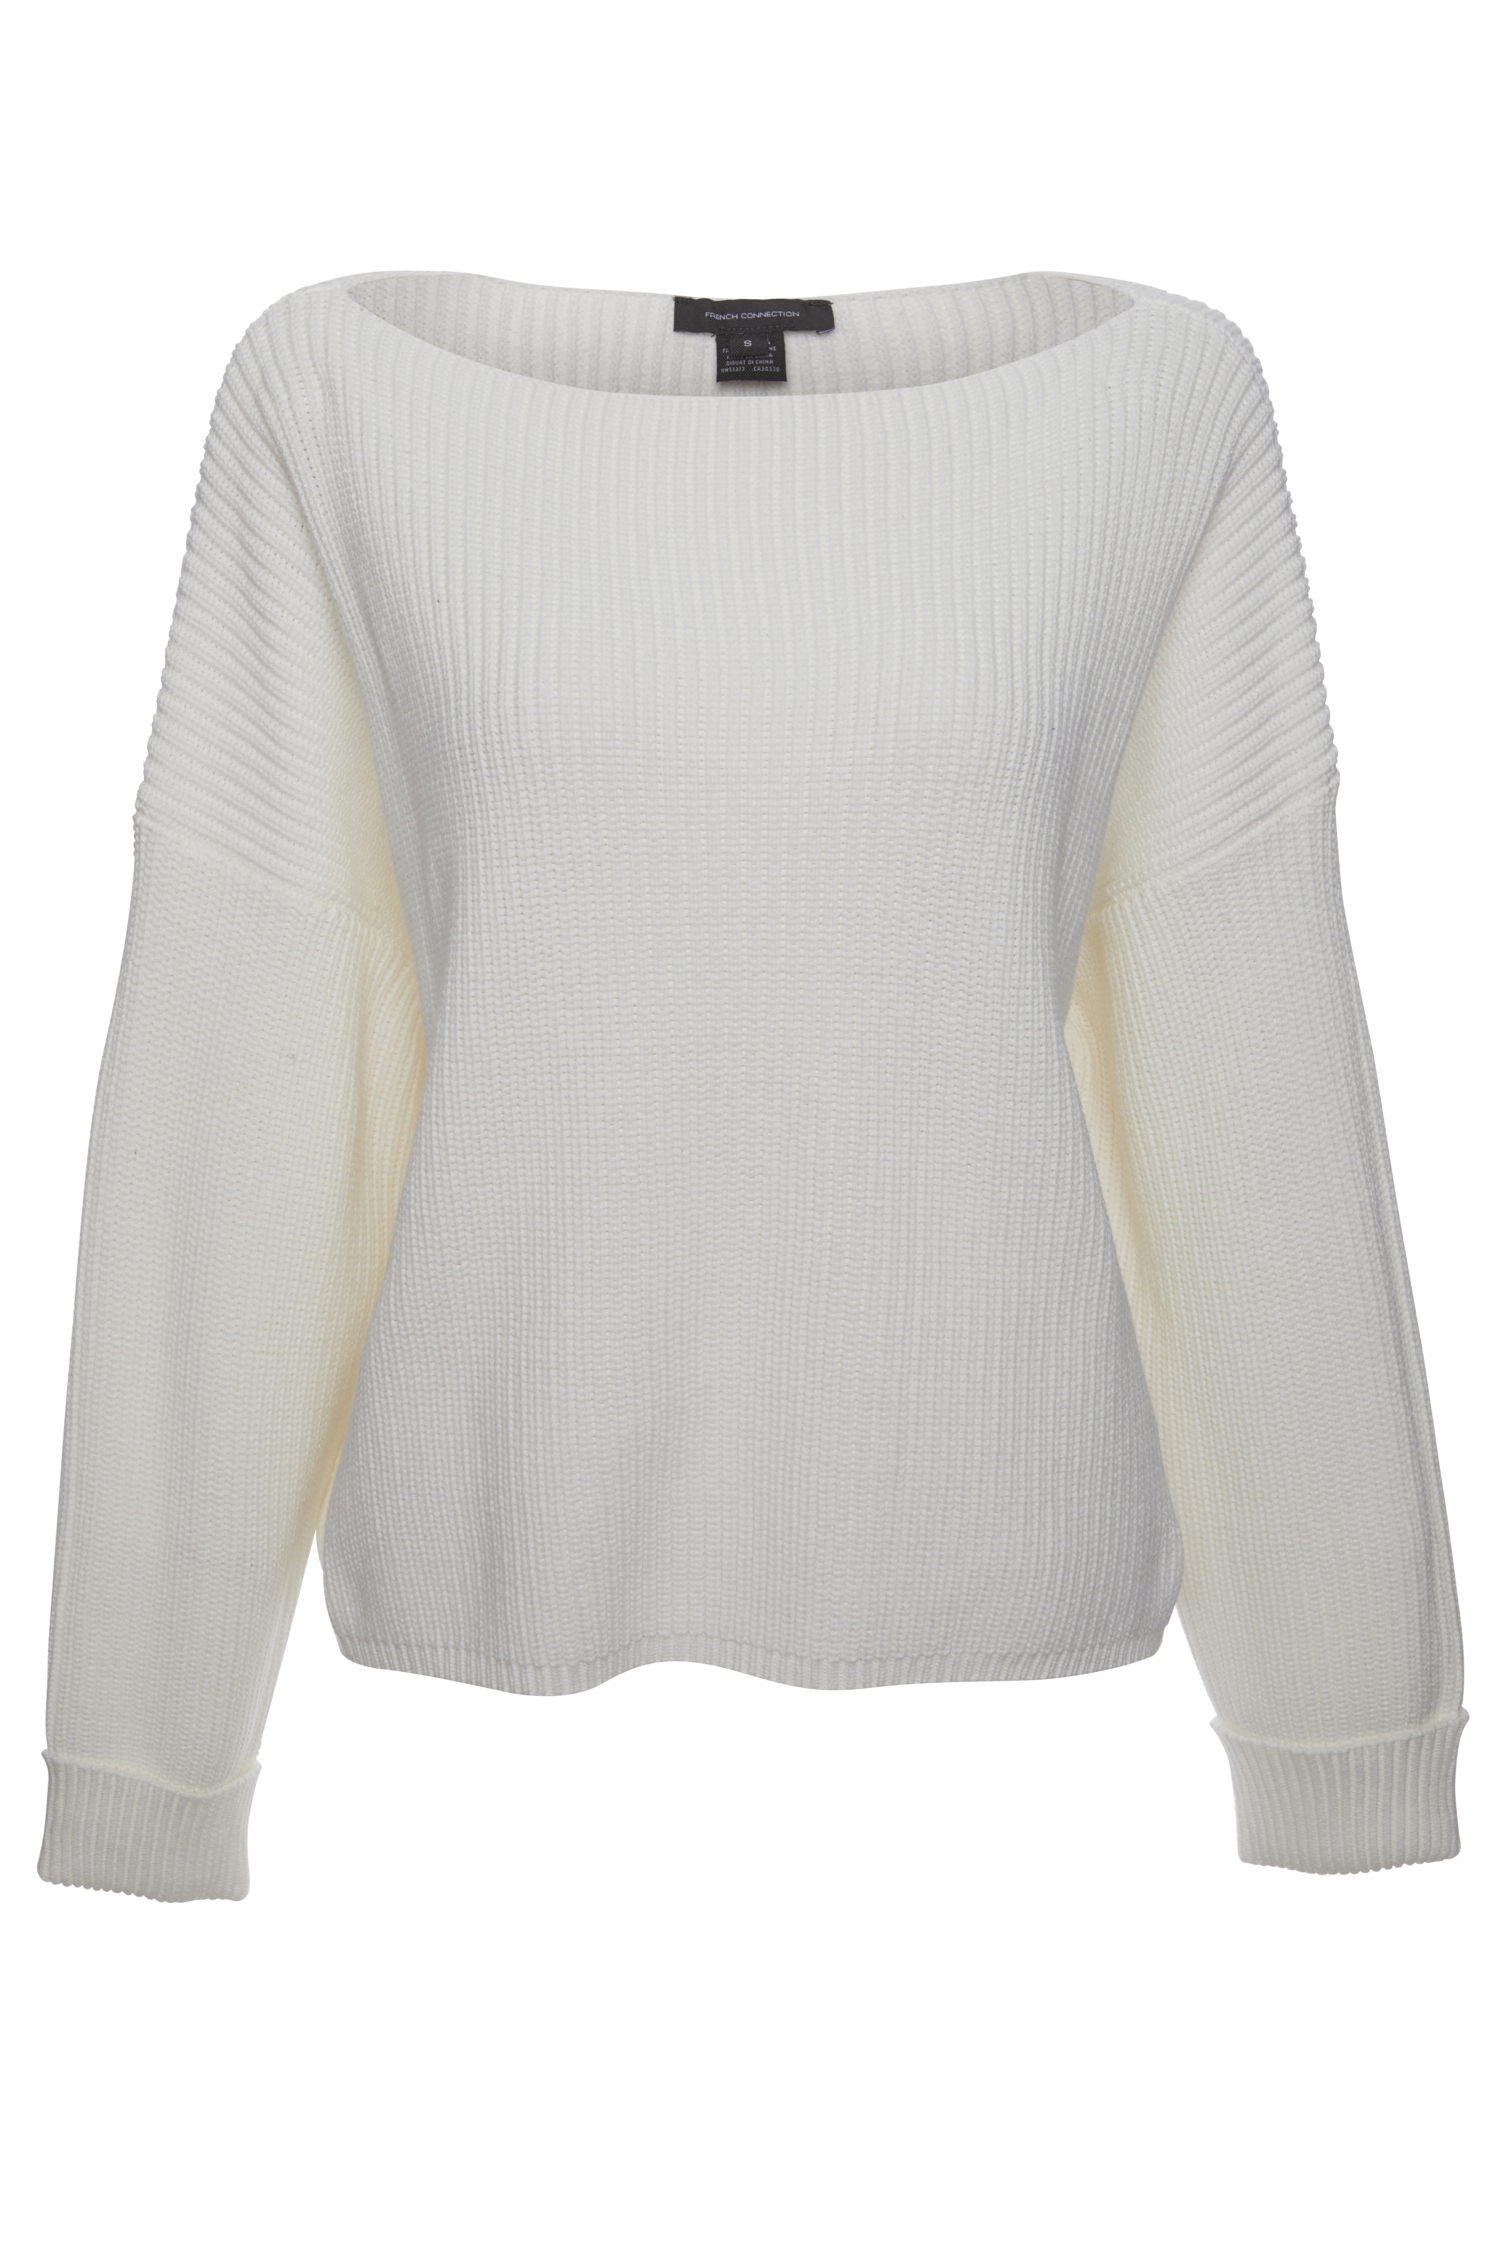 French Connection Boat Neck Sweater